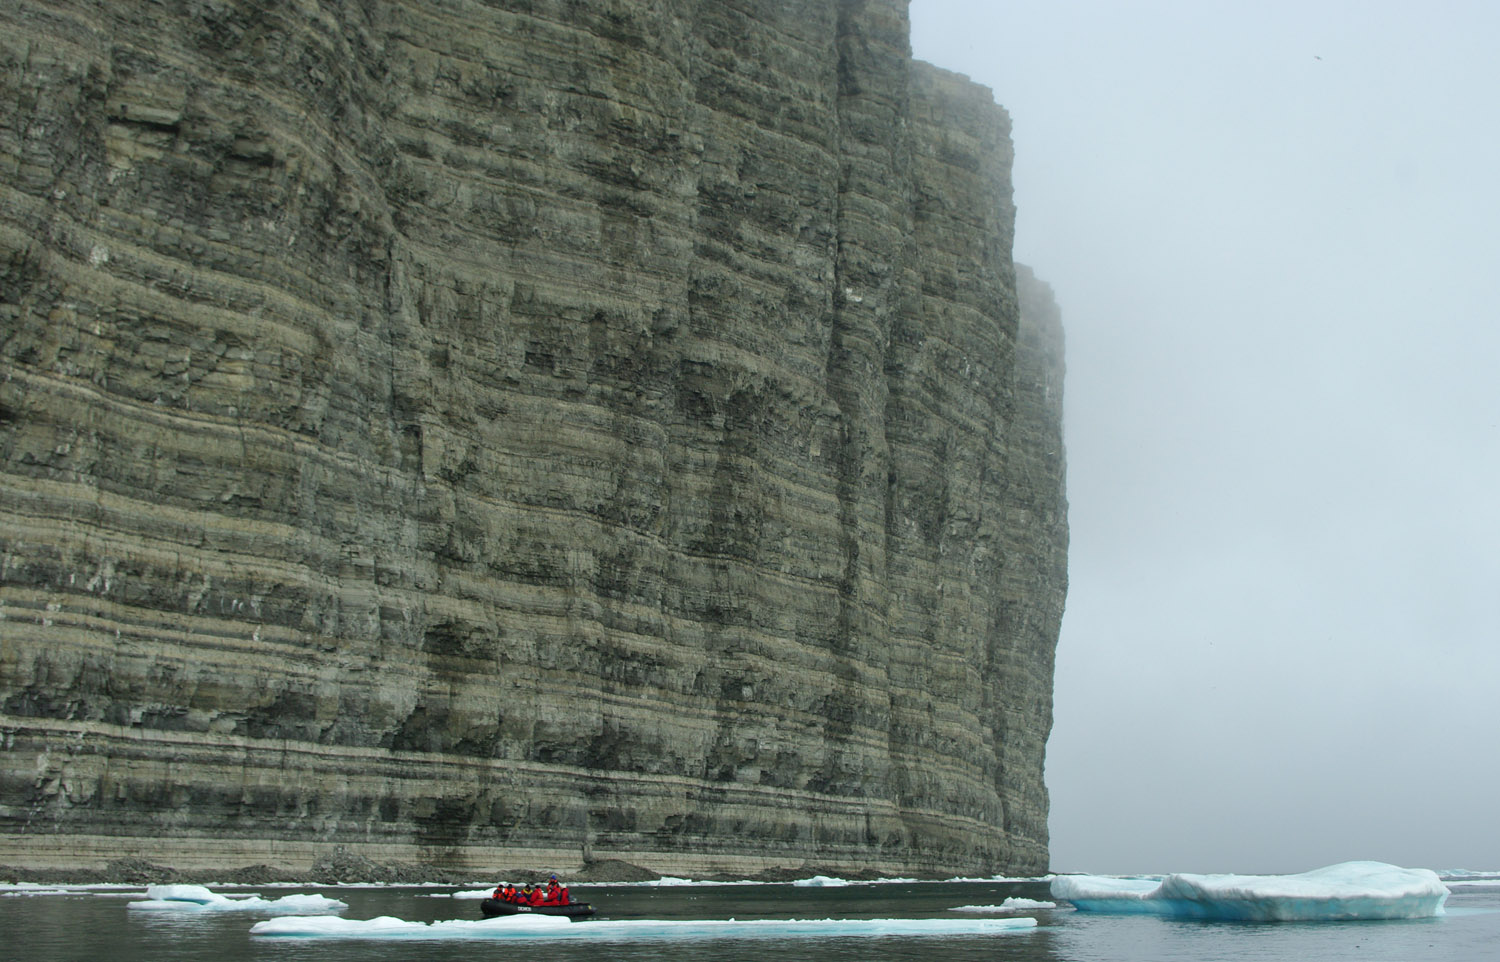 Prince Leopold Island - 300 Meter Cliffs - Cruising by in Zodiacs